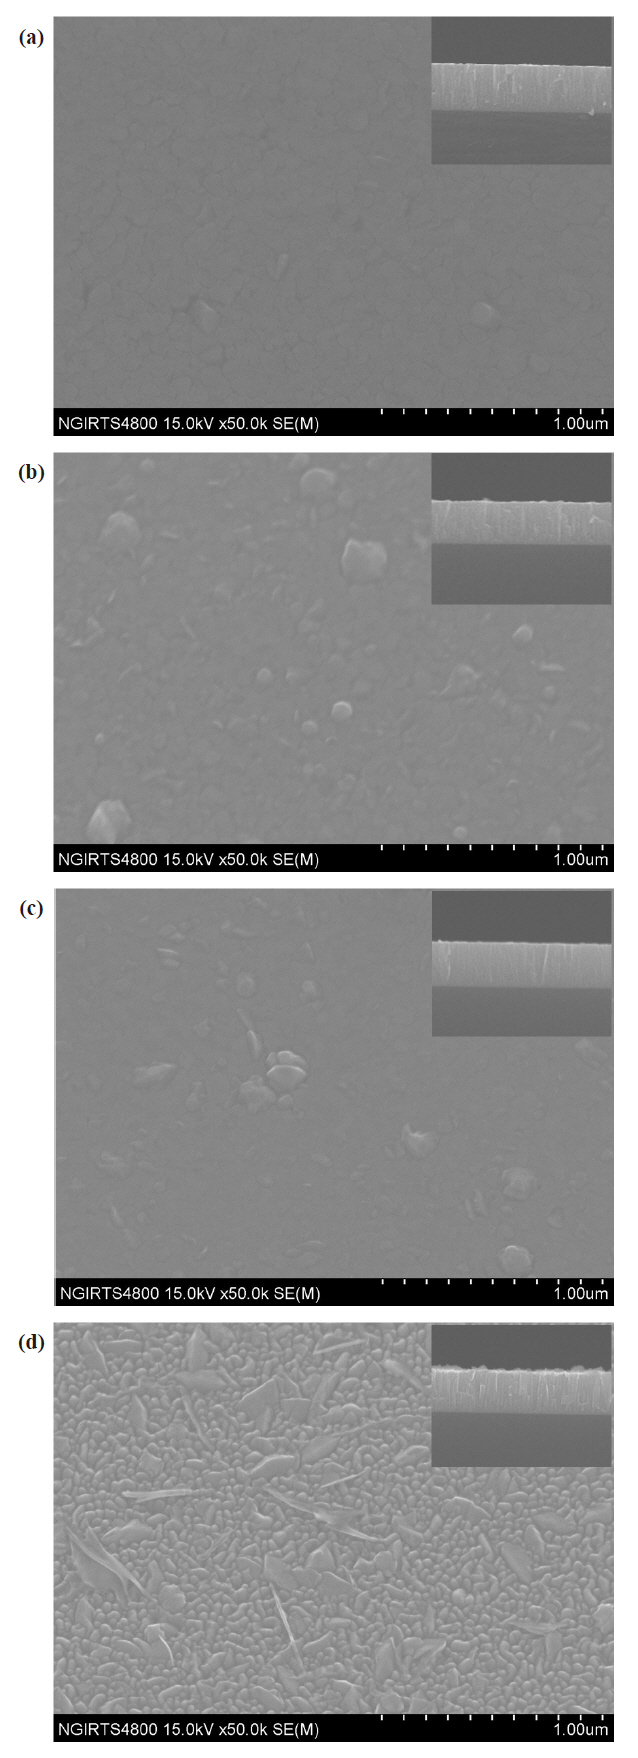 Field emission scanning electron microscopy images of Al-Ncodoped ZnO thin films deposited on Si in (a) N2 20% (b) N2 40%(c) N2 60% and (d) N2 80% together with their corresponding crosssectionalimages as insets.